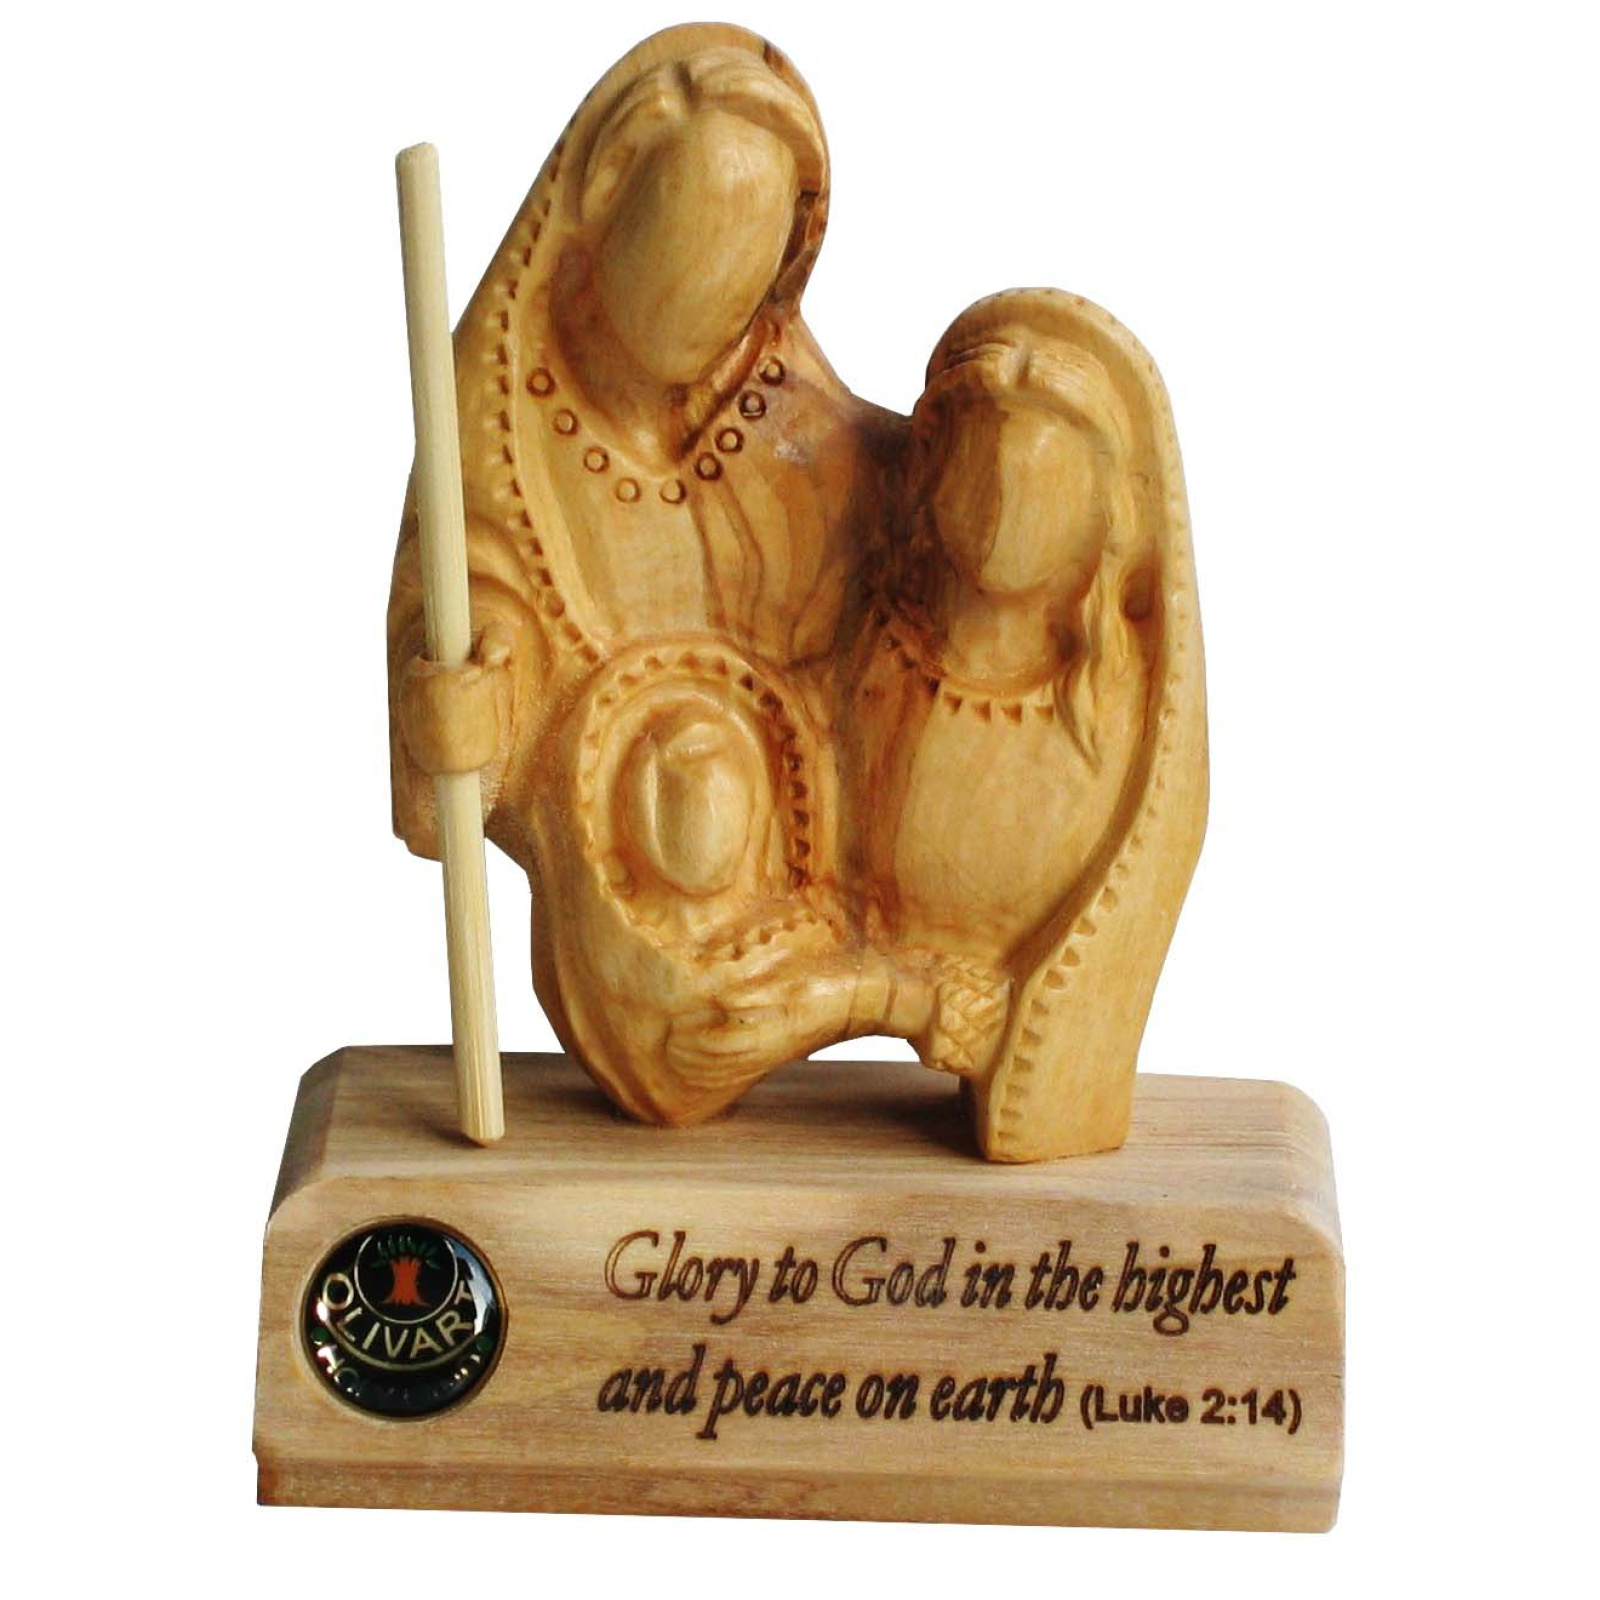 holy family bust